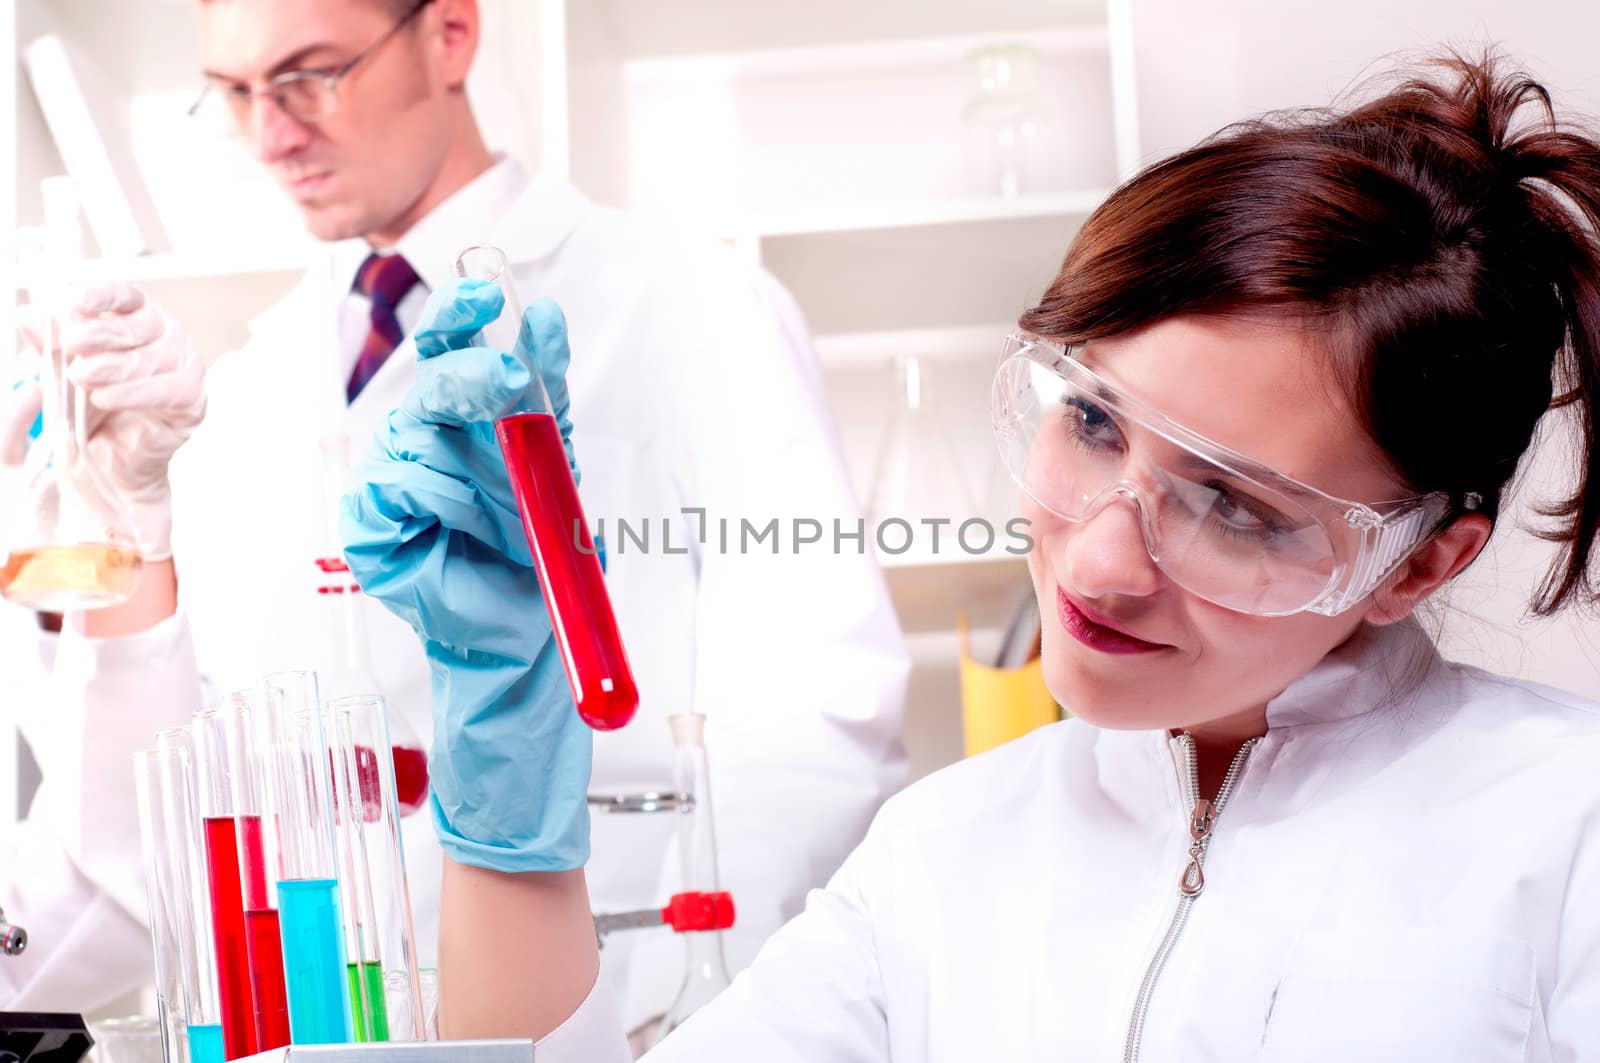 portrait of a beautiful woman chemist, looks at a test tube with red fluid